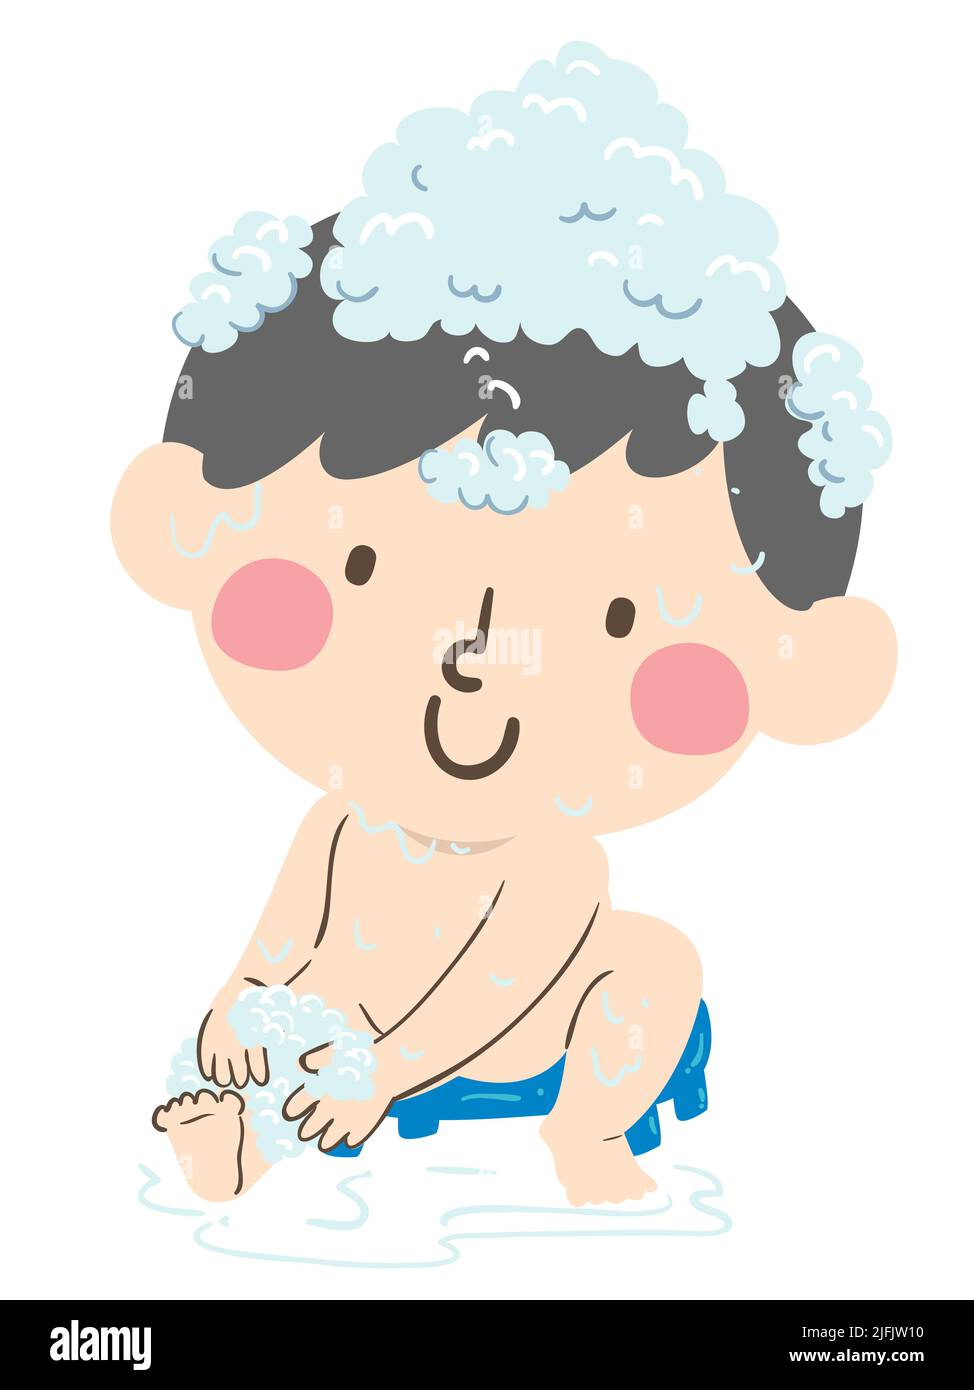 Illustration of Kid Boy with Bath Bubbles, Sitting on a Plastic Bathroom Stool and Scrubbing His Legs Stock Photo